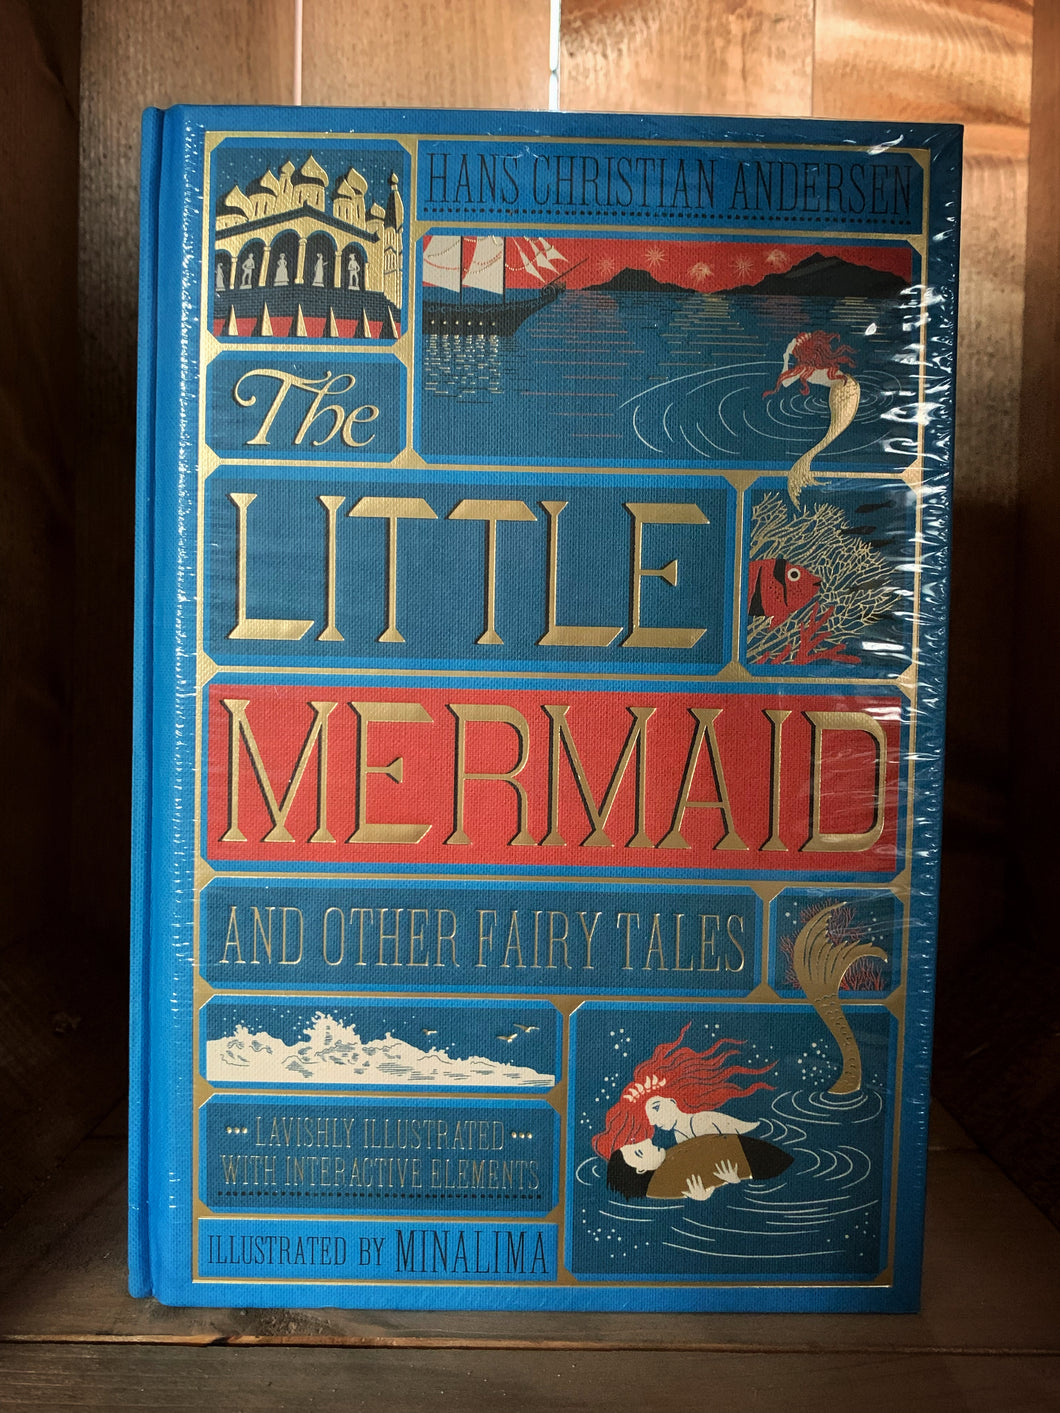 Image of The Little Mermaid and Other Fairy Tales edition by MinaLima. This book features a bright blue clothbound cover wprinted with red, gold and dark blue to showcase images from the Little Mermaid. Images include the undersea castle, the mermaid above the sea watching a ship, a fish amongst coral and the little mermaid with the shipwrecked prince on the waves.